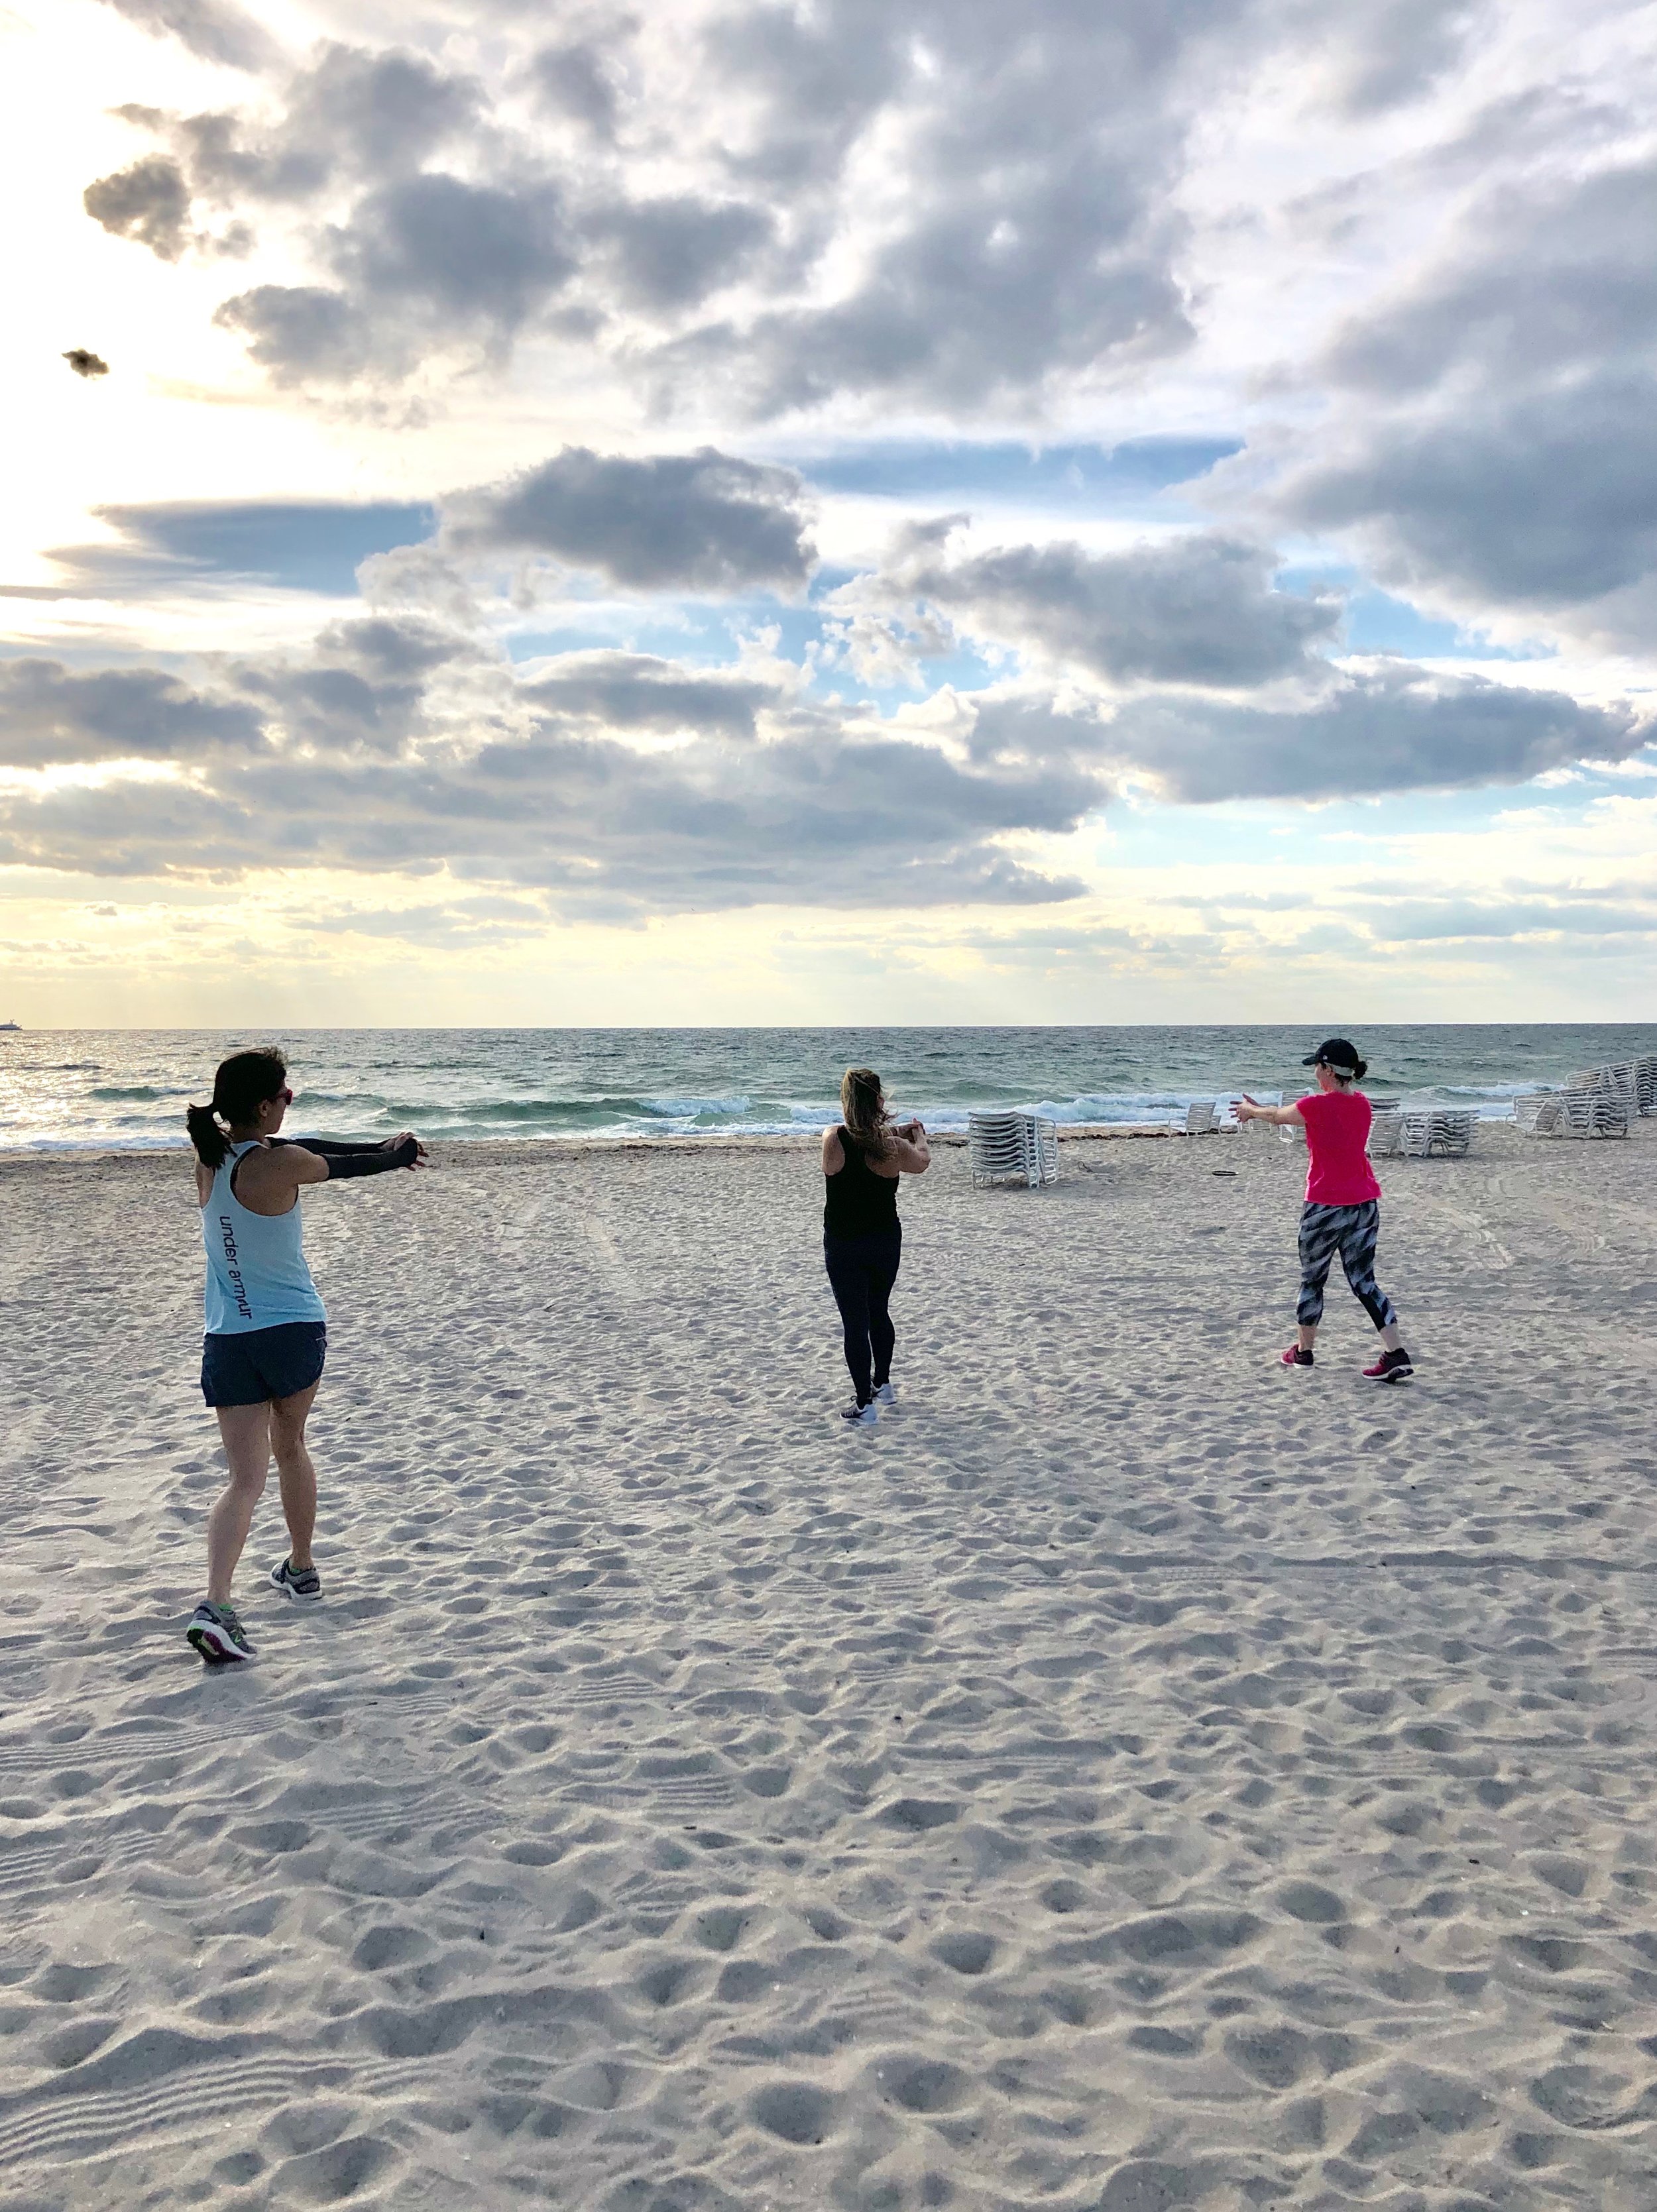 Boot camp guests workout on beach during fitness vacation.